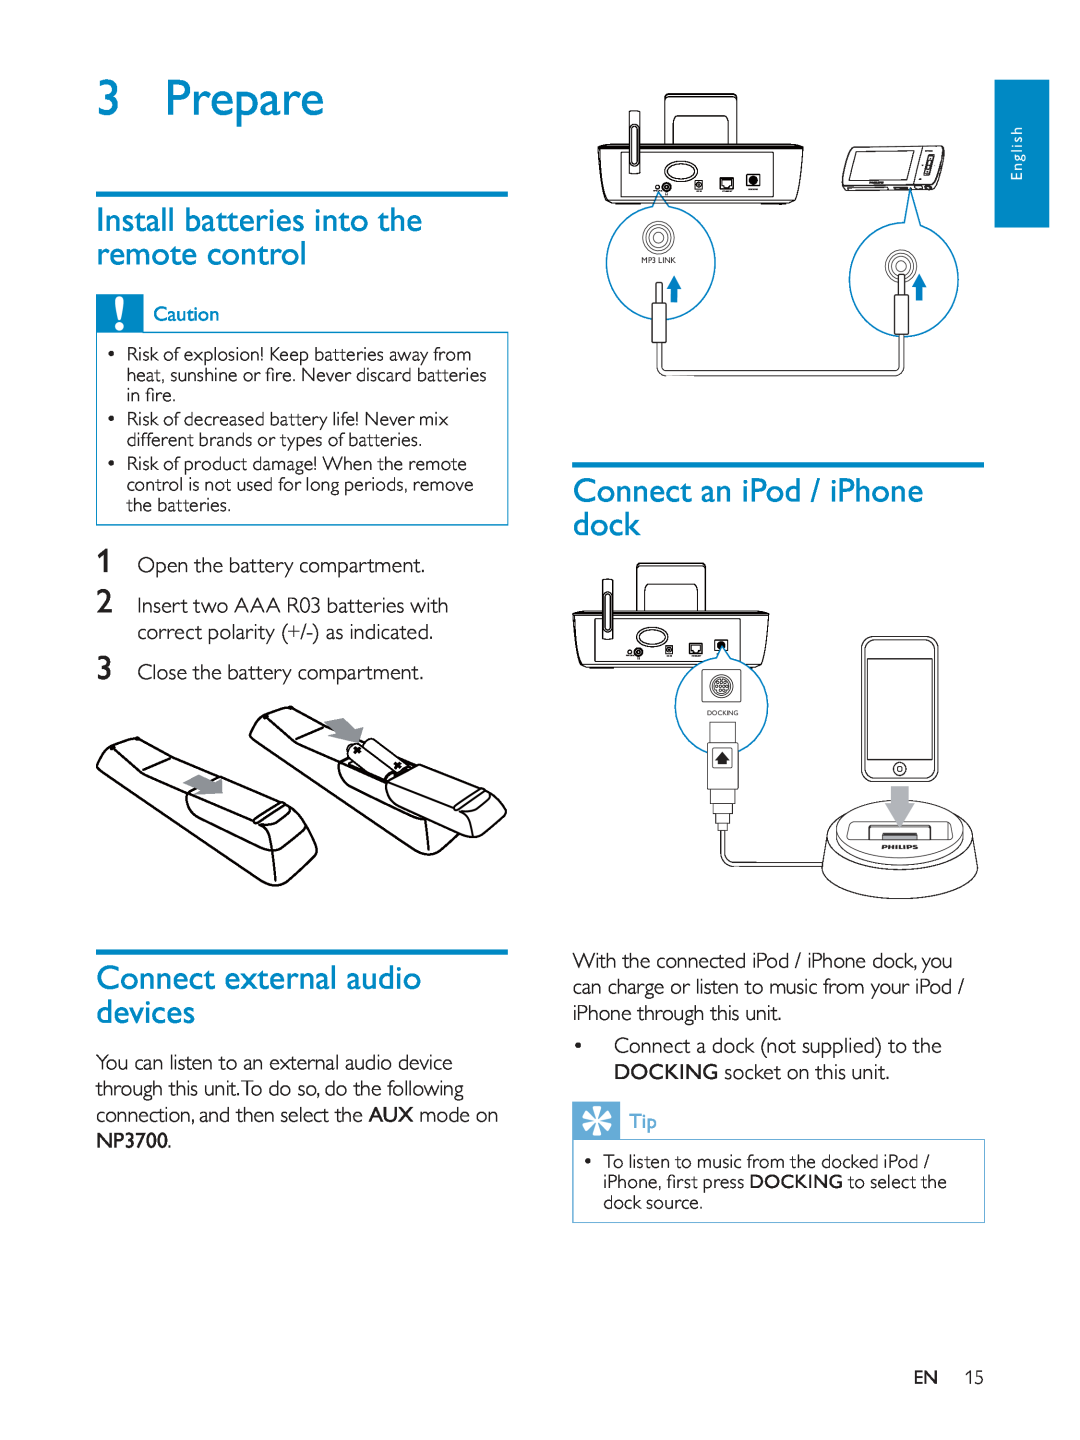 Philips NP3700/12 user manual Prepare, Install batteries into the remote control, Connect external audio devices 